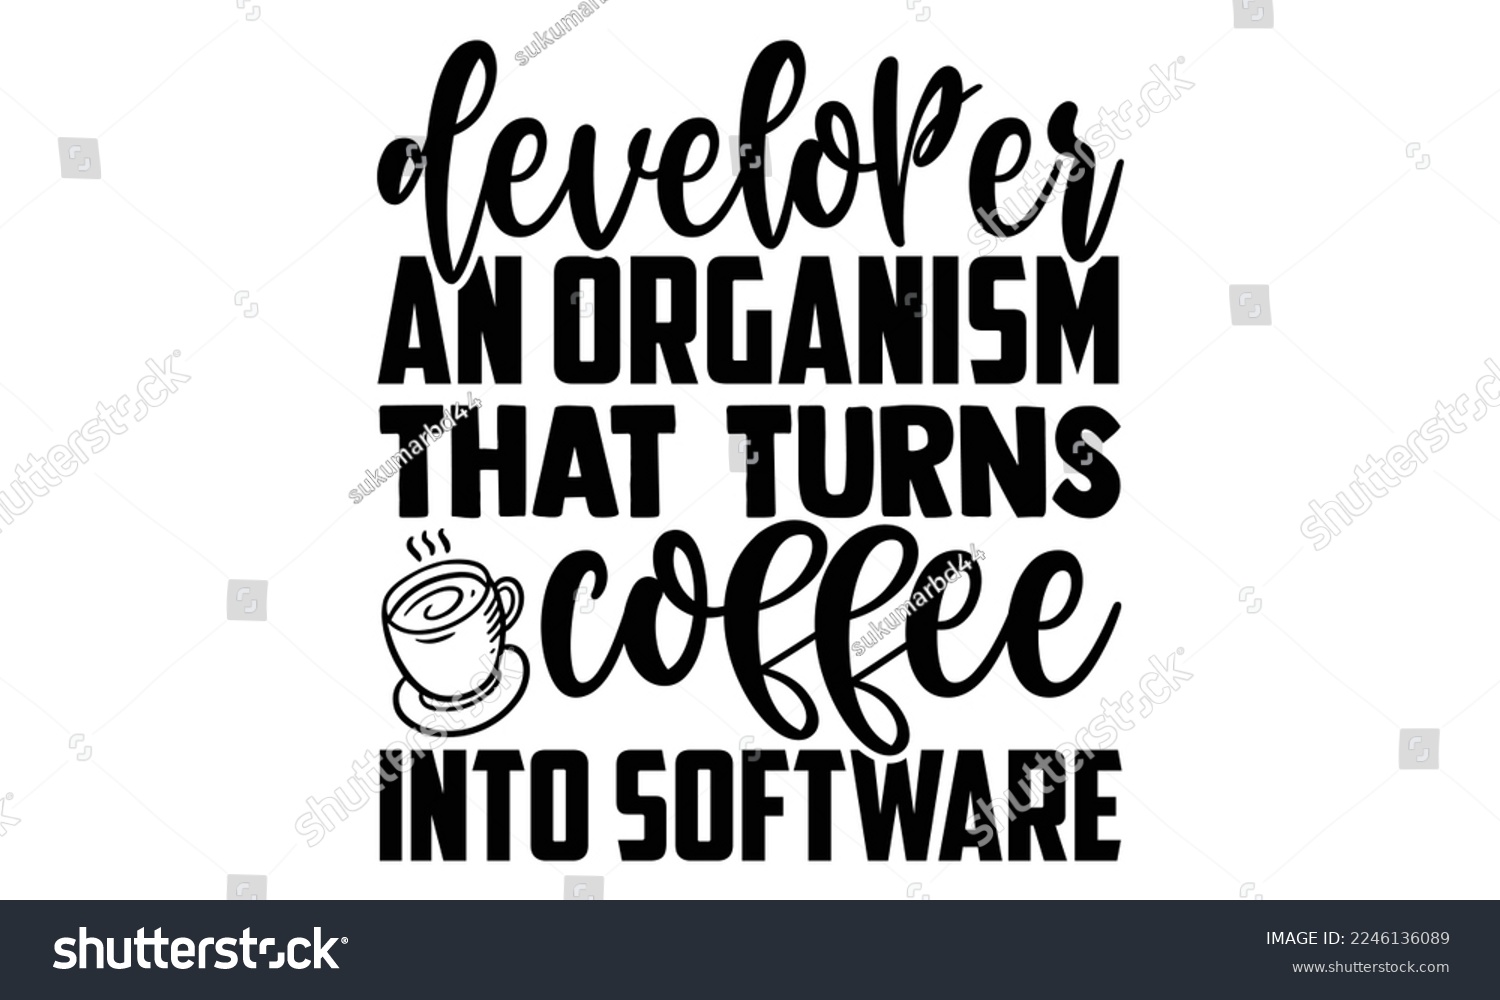 SVG of Developer An Organism That Turns Coffee Into Software - Software Developer T-shirt Design, Illustration for prints on bags, posters, and cards, svg for Cutting Machine, Silhouette Cameo, Cricut svg